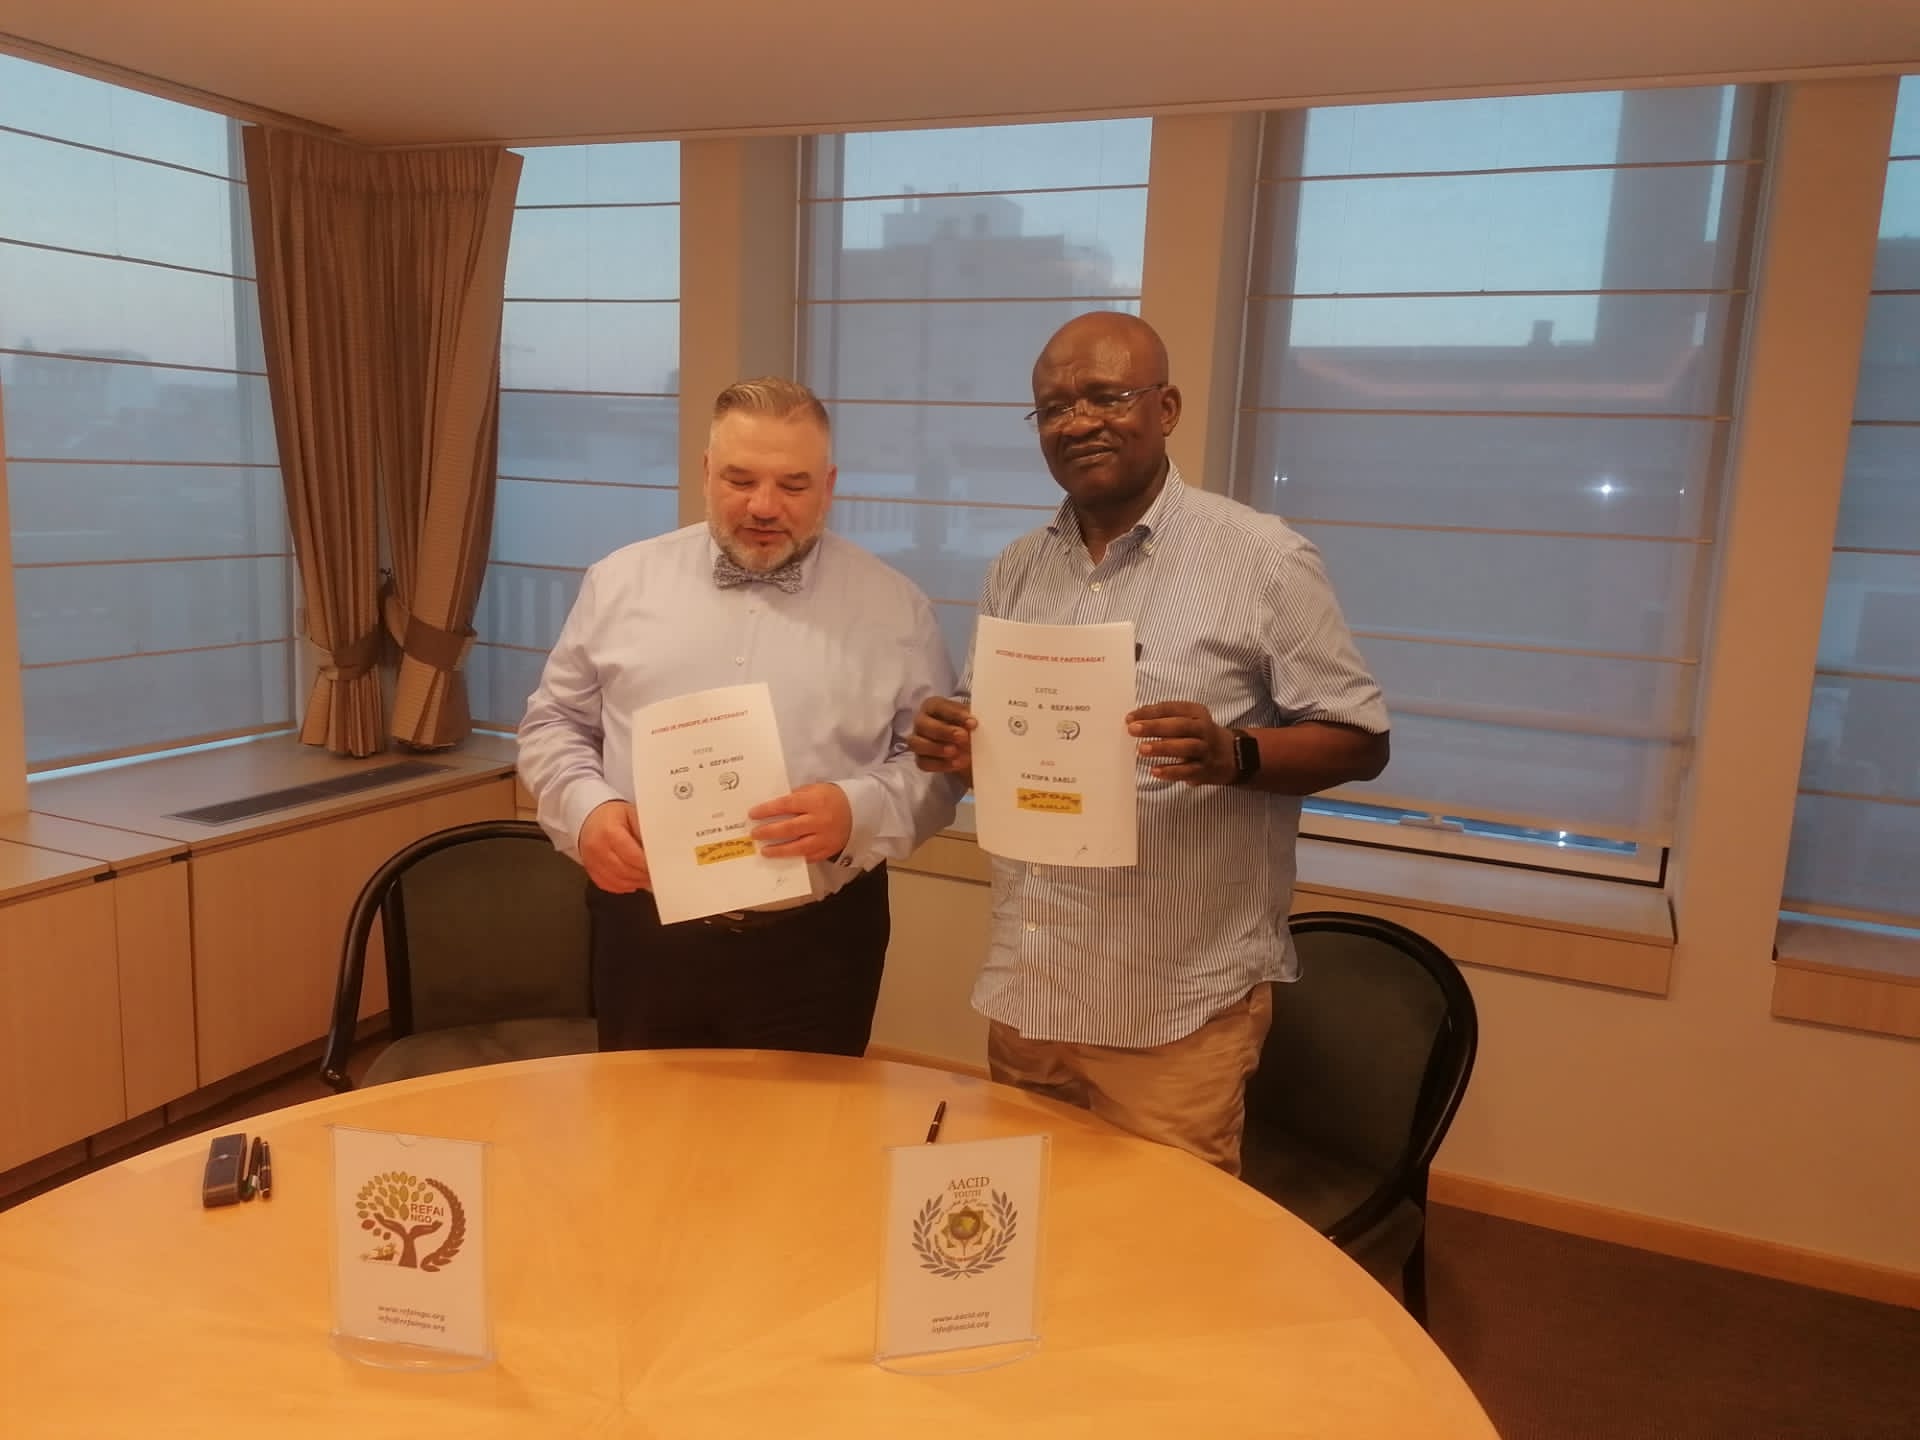 18 of June 2021 signing the Partnership Agreement for Gold Mine in DRC